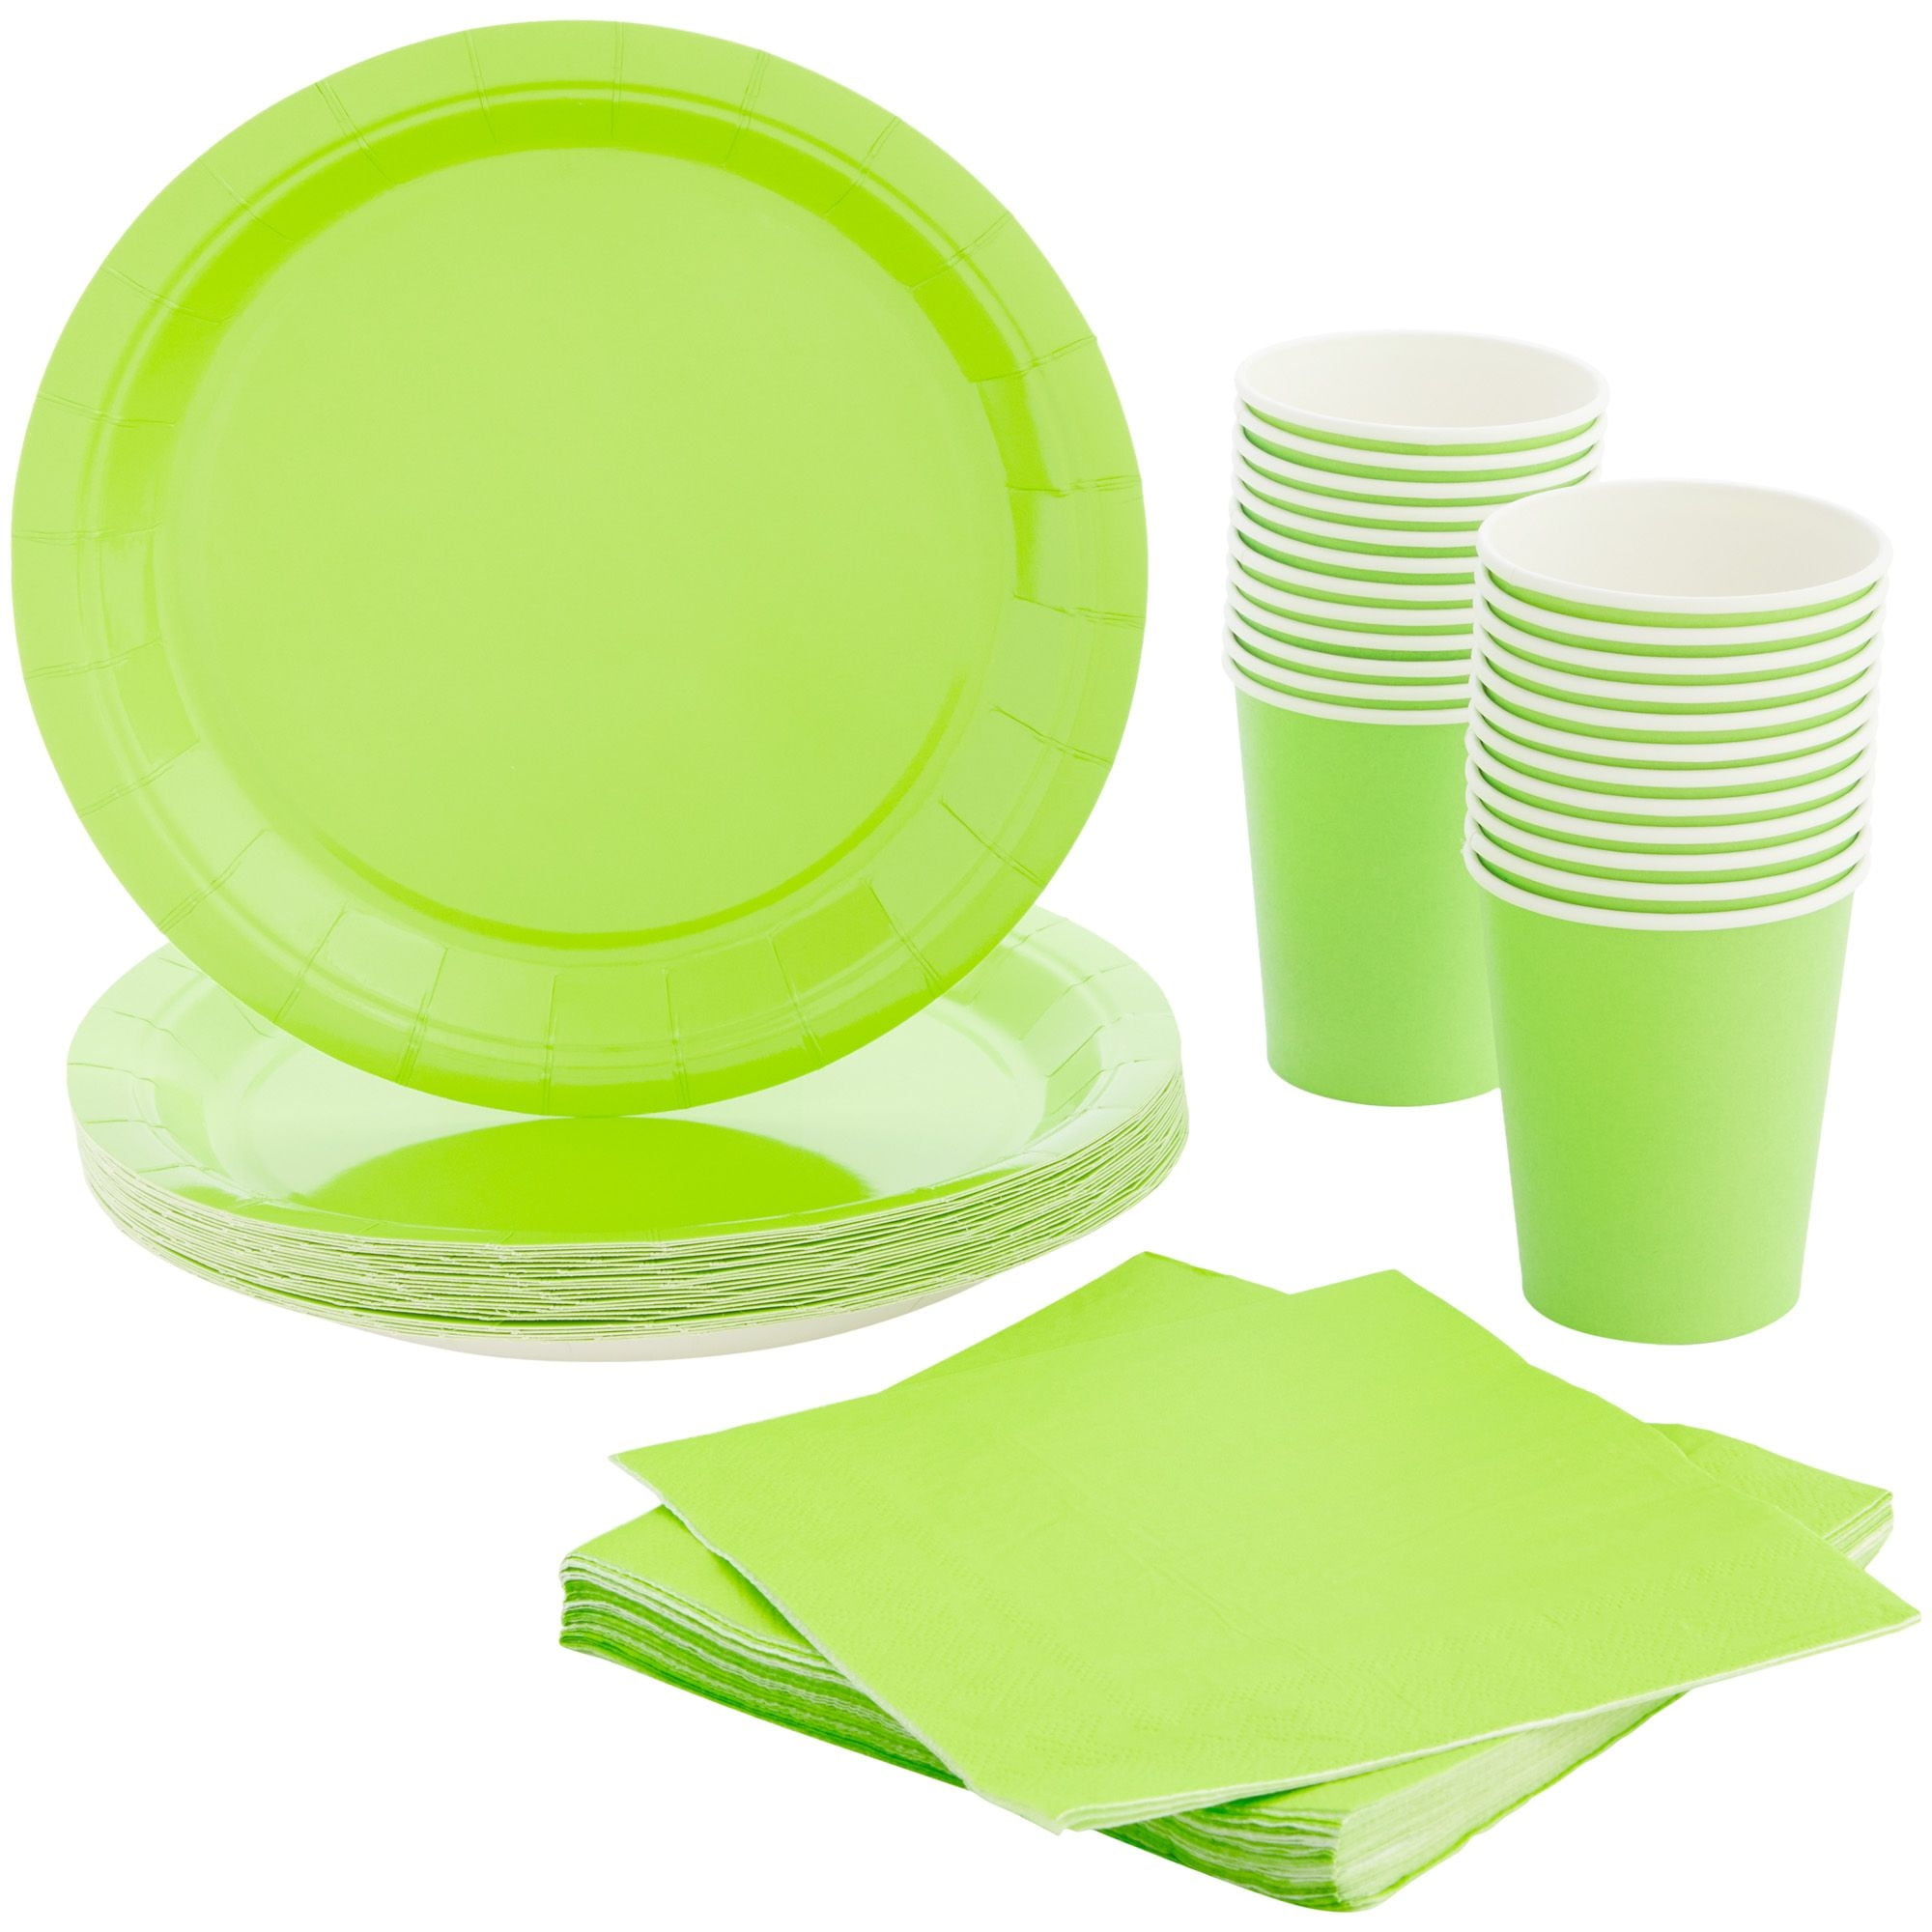 Premium 12 oz Plastic Cups, Olive Green: Party at Lewis Elegant Party  Supplies, Plastic Dinnerware, Paper Plates and Napkins